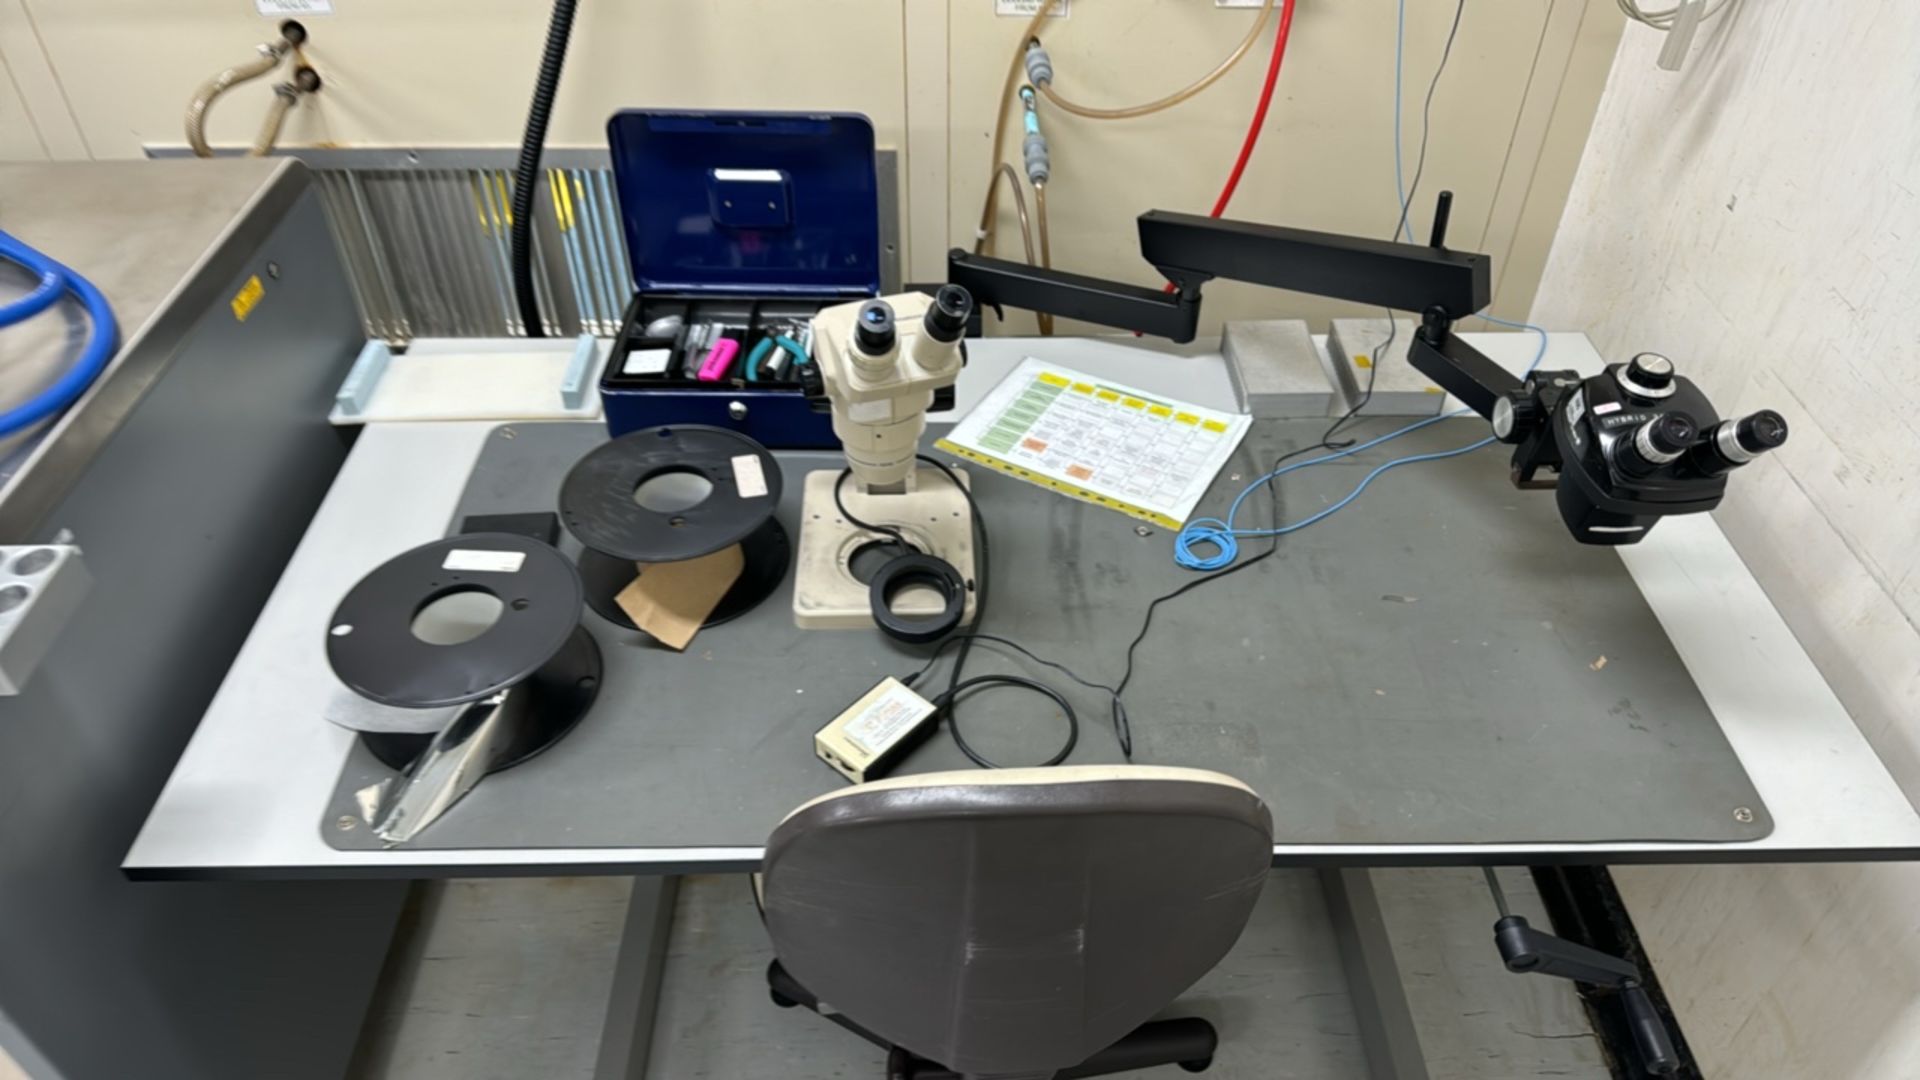 Adjustable Desk With Microscope - Image 4 of 4